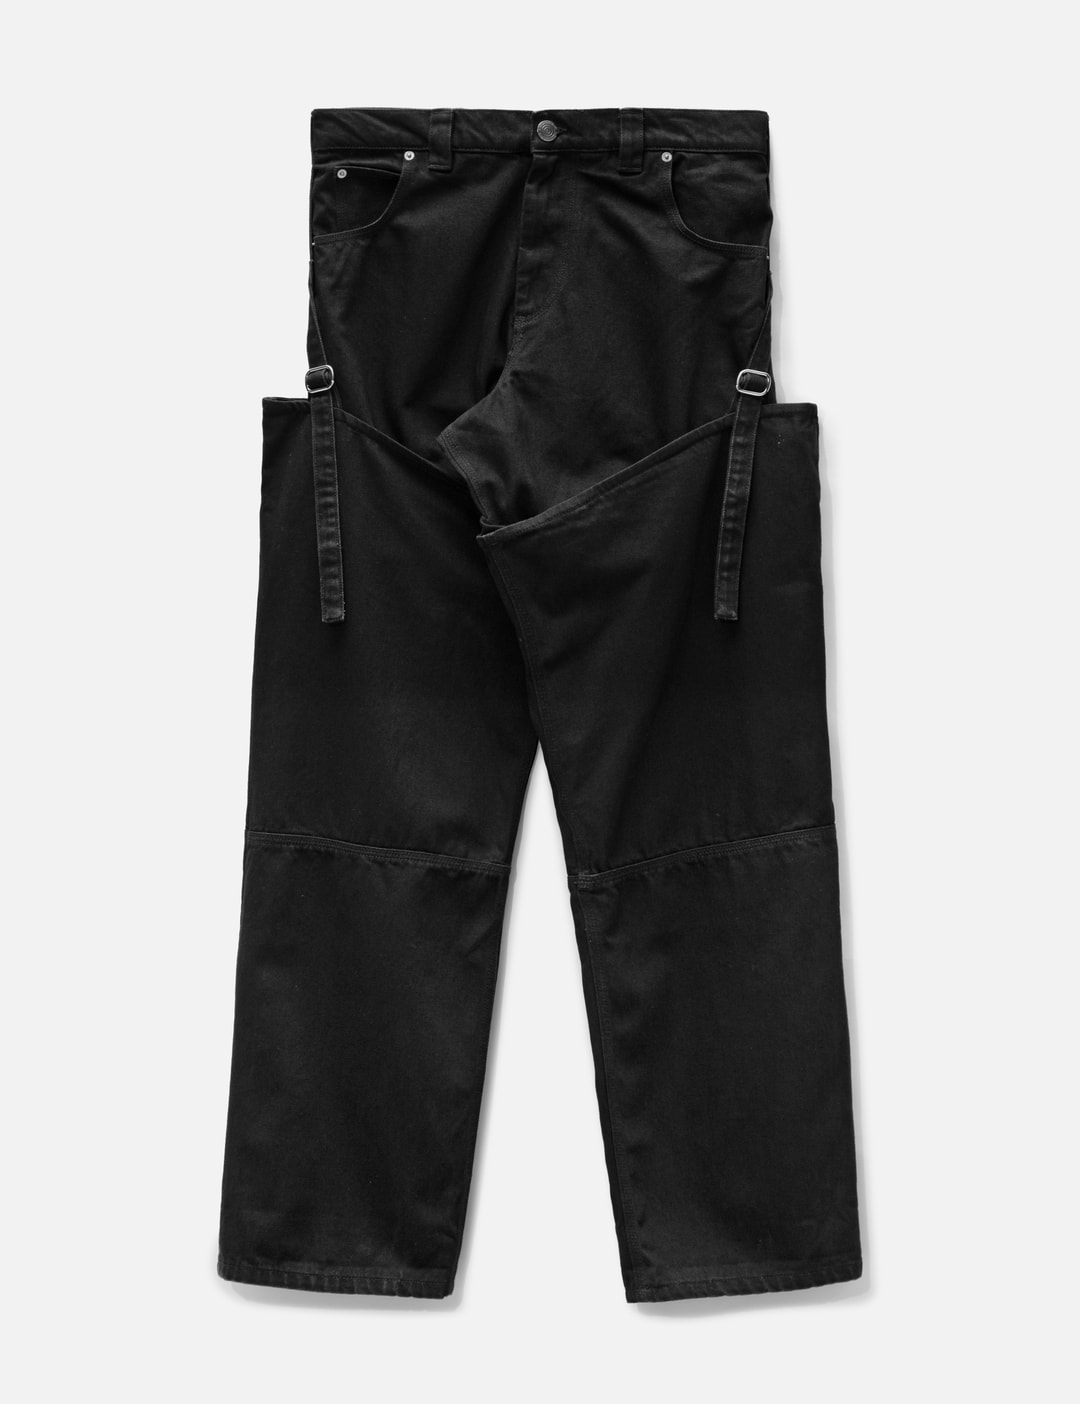 Charles Jeffrey Loverboy - WADER JEAN | HBX - Globally Curated Fashion ...